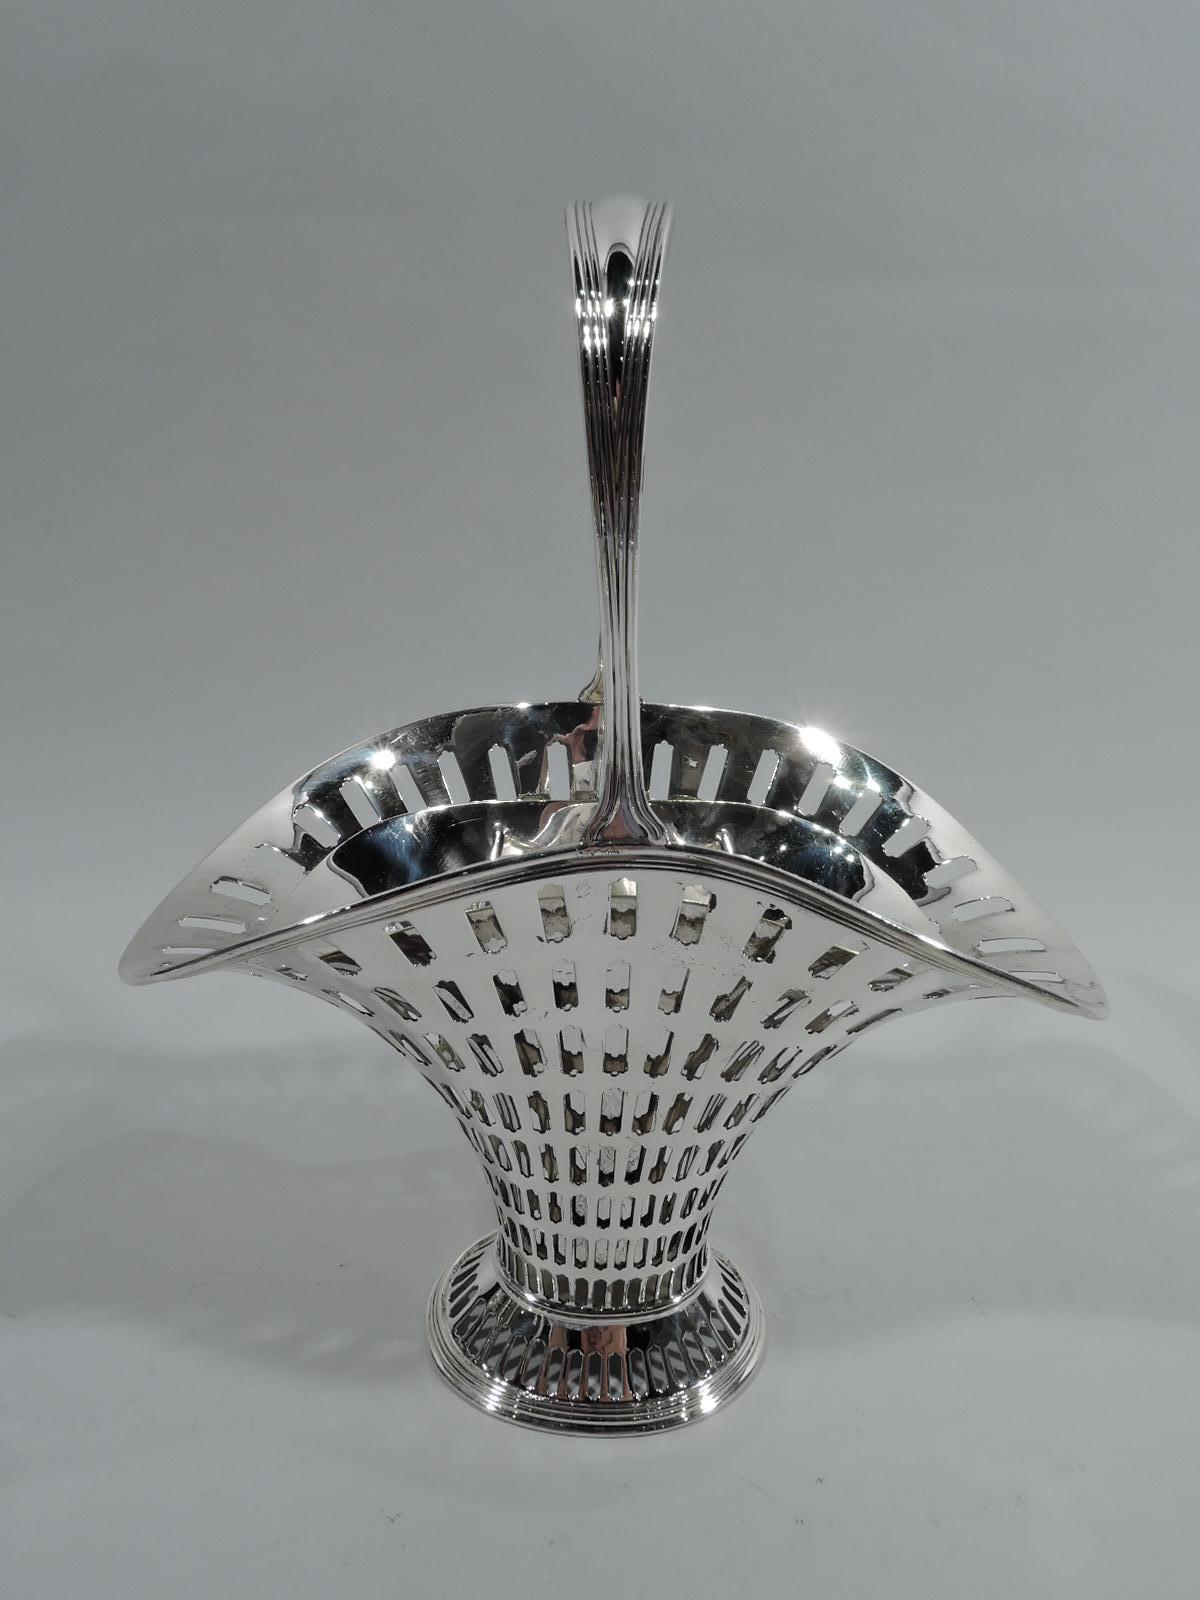 Edwardian Modern sterling silver basket. Made by Tiffany & Co. in New York. Tapering and “squashed” ovoid body with flared mouth and spread foot. Reeded and tapering stationary handle. Graduated tubular piercing. With silver-plated liner. Basket